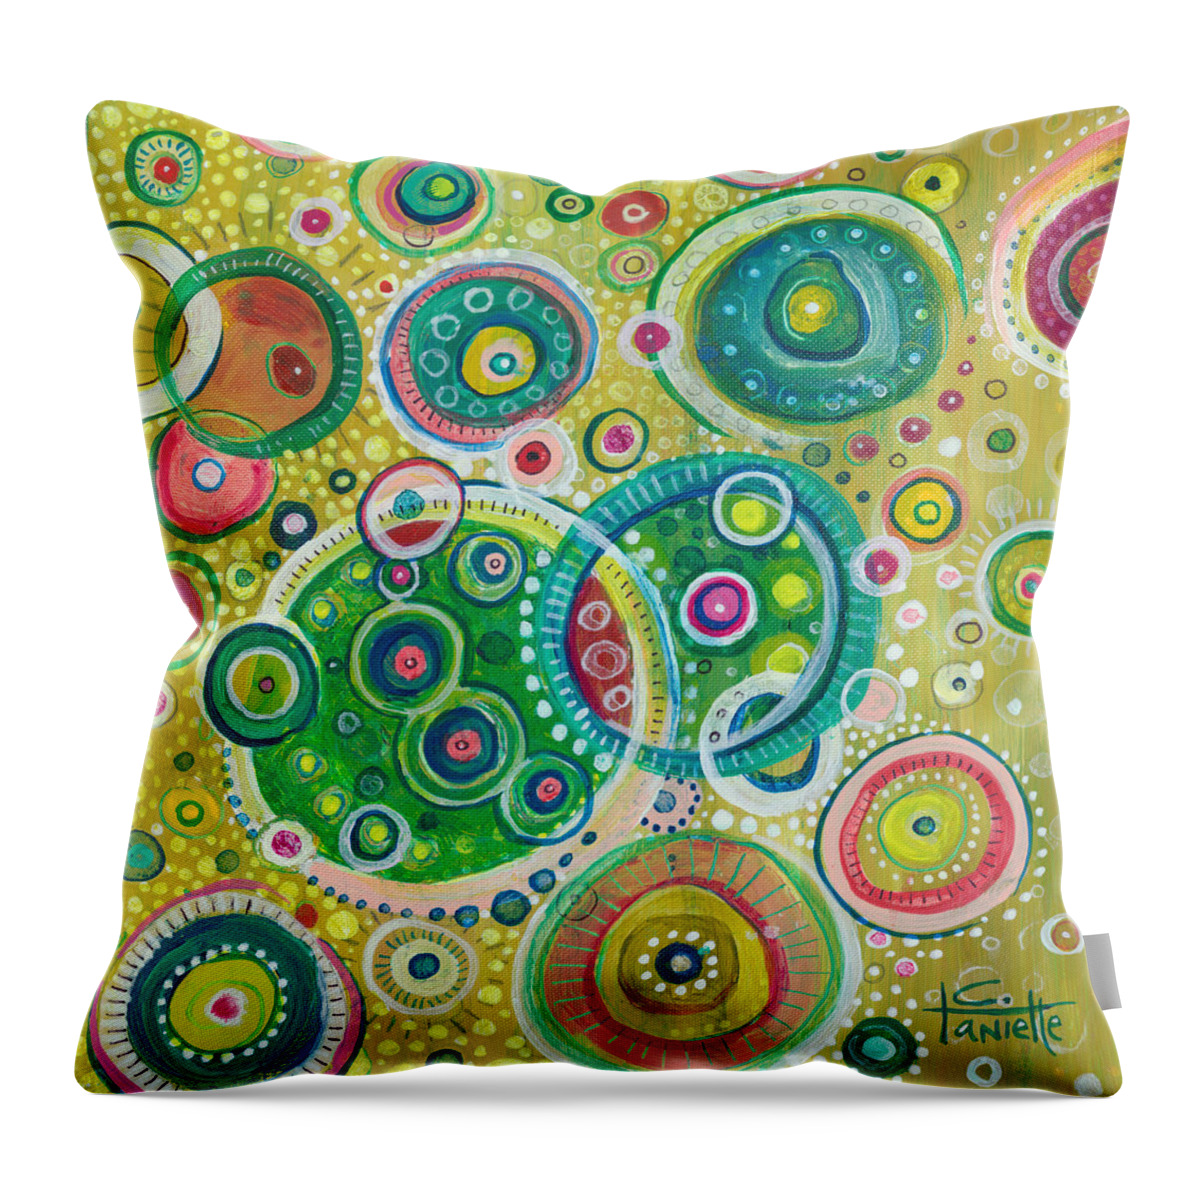 Contemporary Throw Pillow featuring the painting Organized Chaos by Tanielle Childers